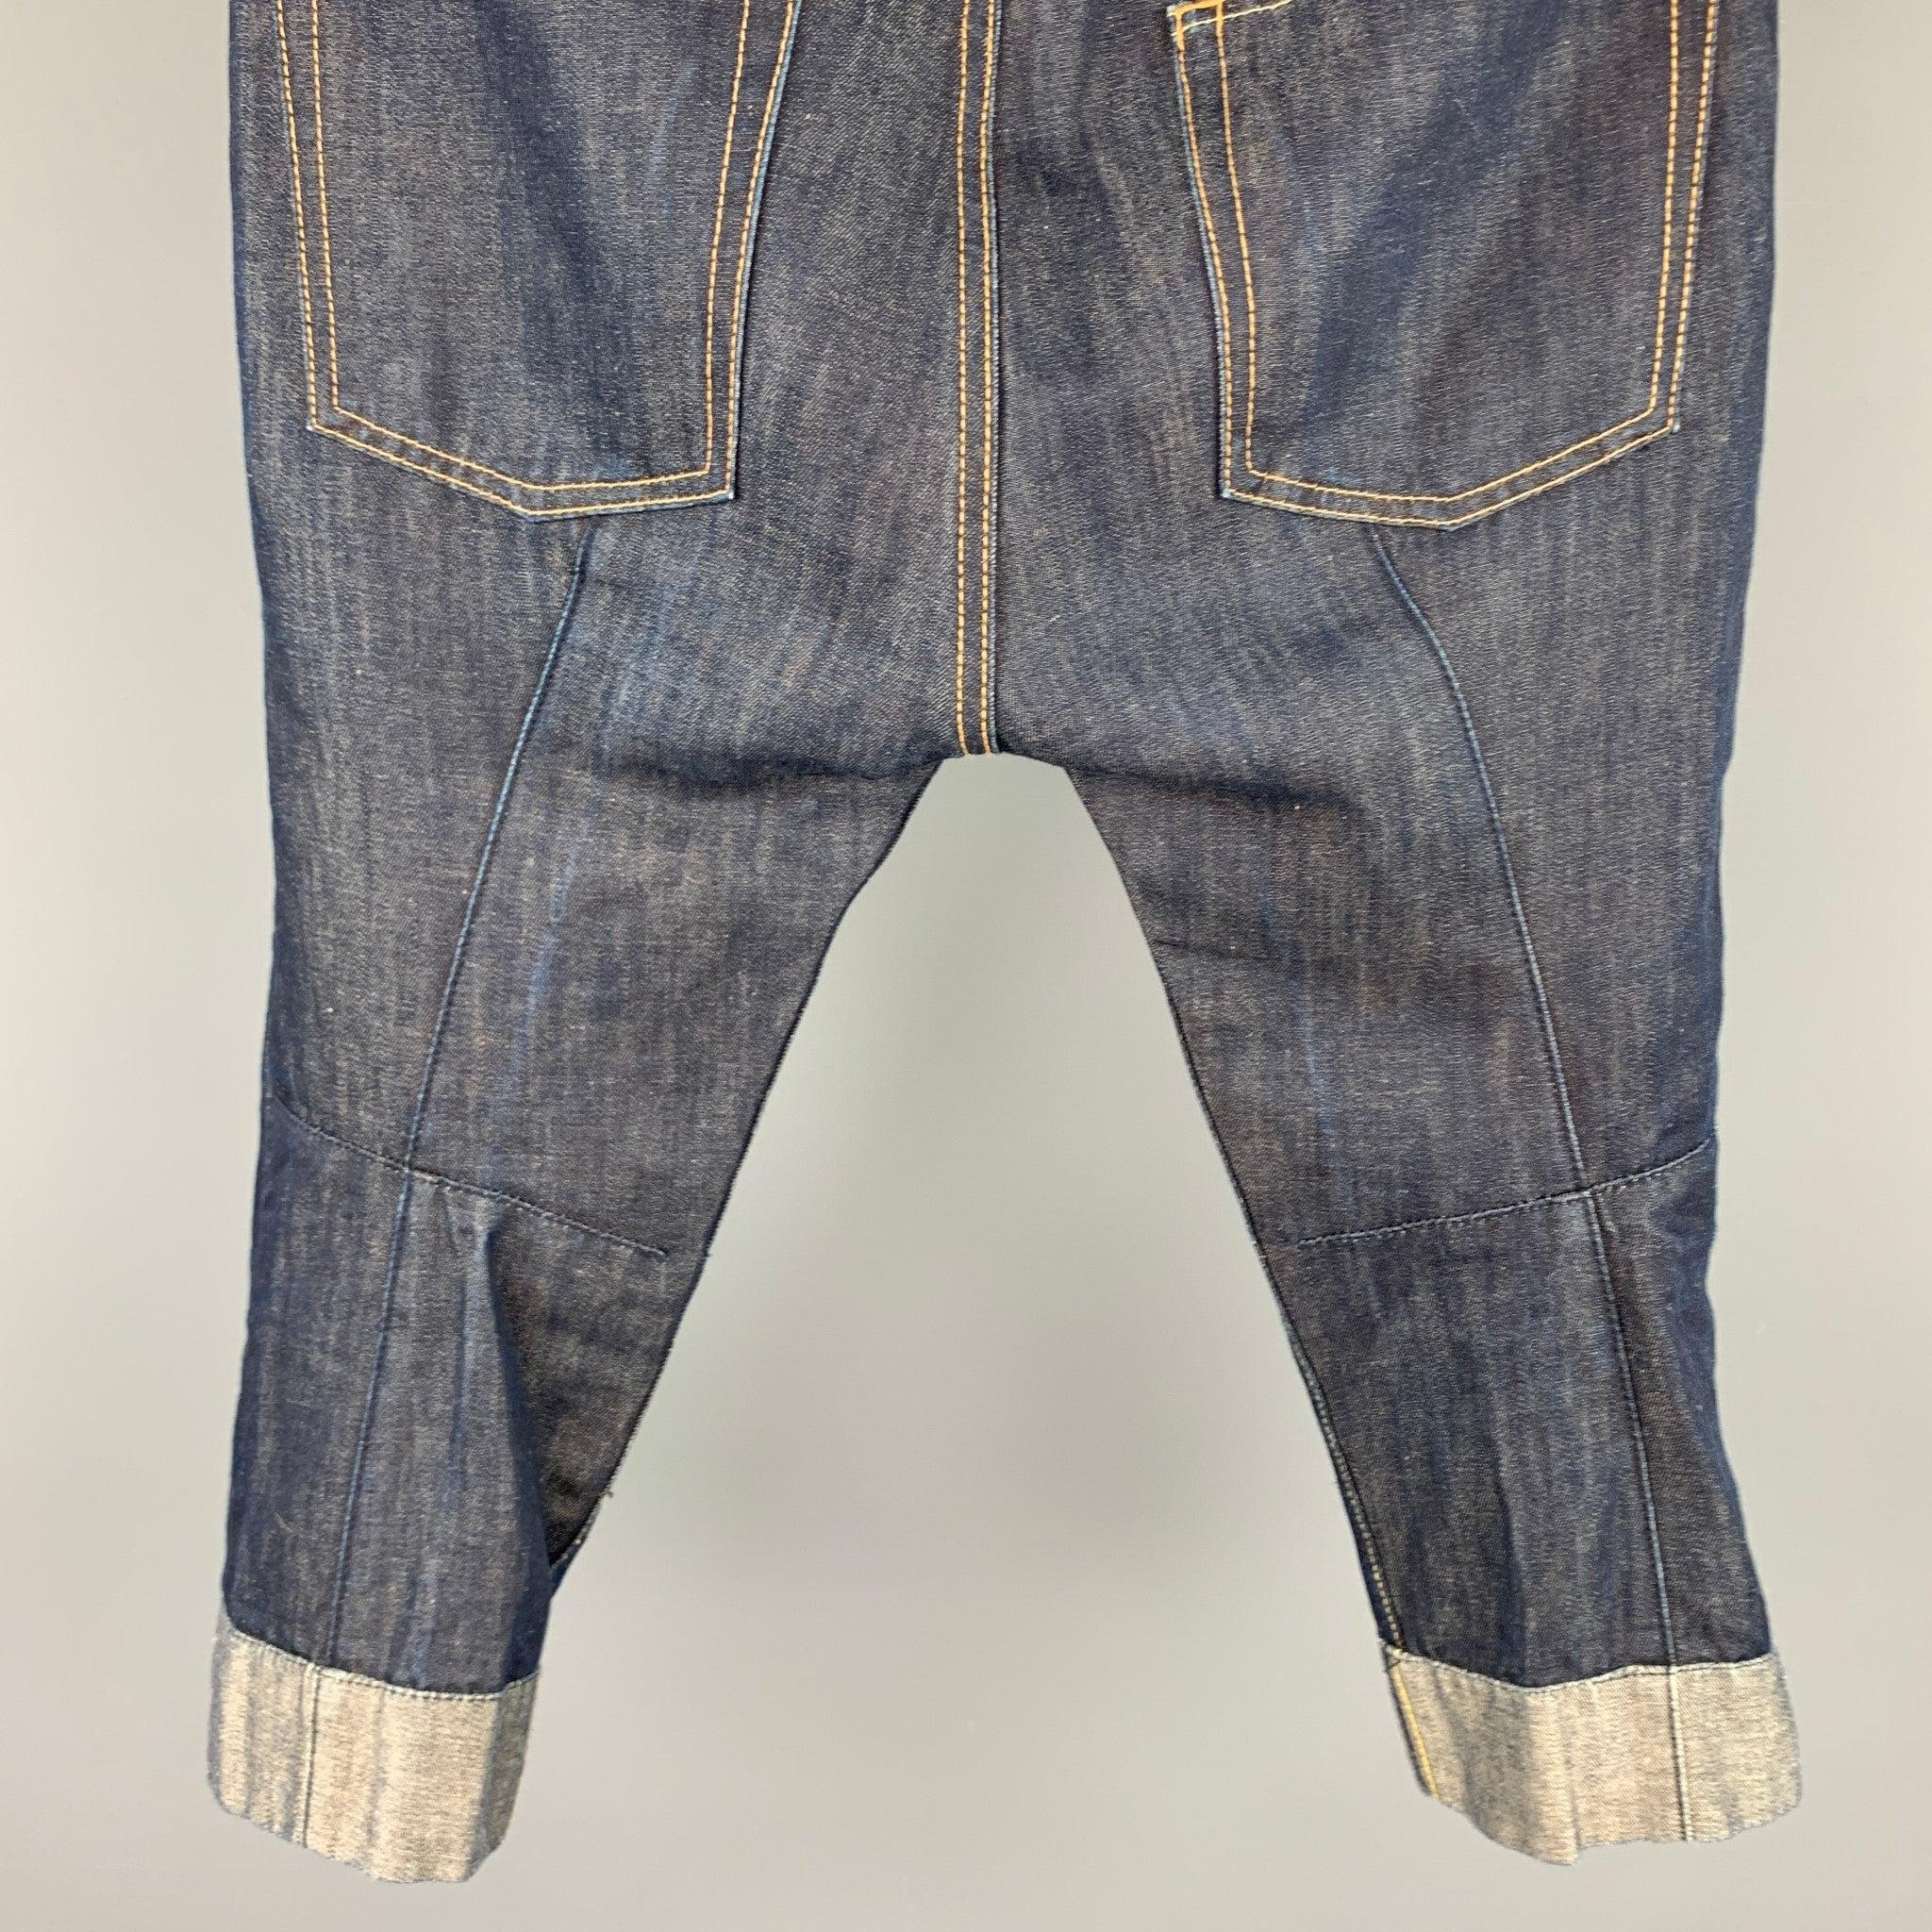 JUNYA WATANABE Size XS Indigo Contrast Stitch Cotton / Linen Cropped Jeans In Good Condition For Sale In San Francisco, CA